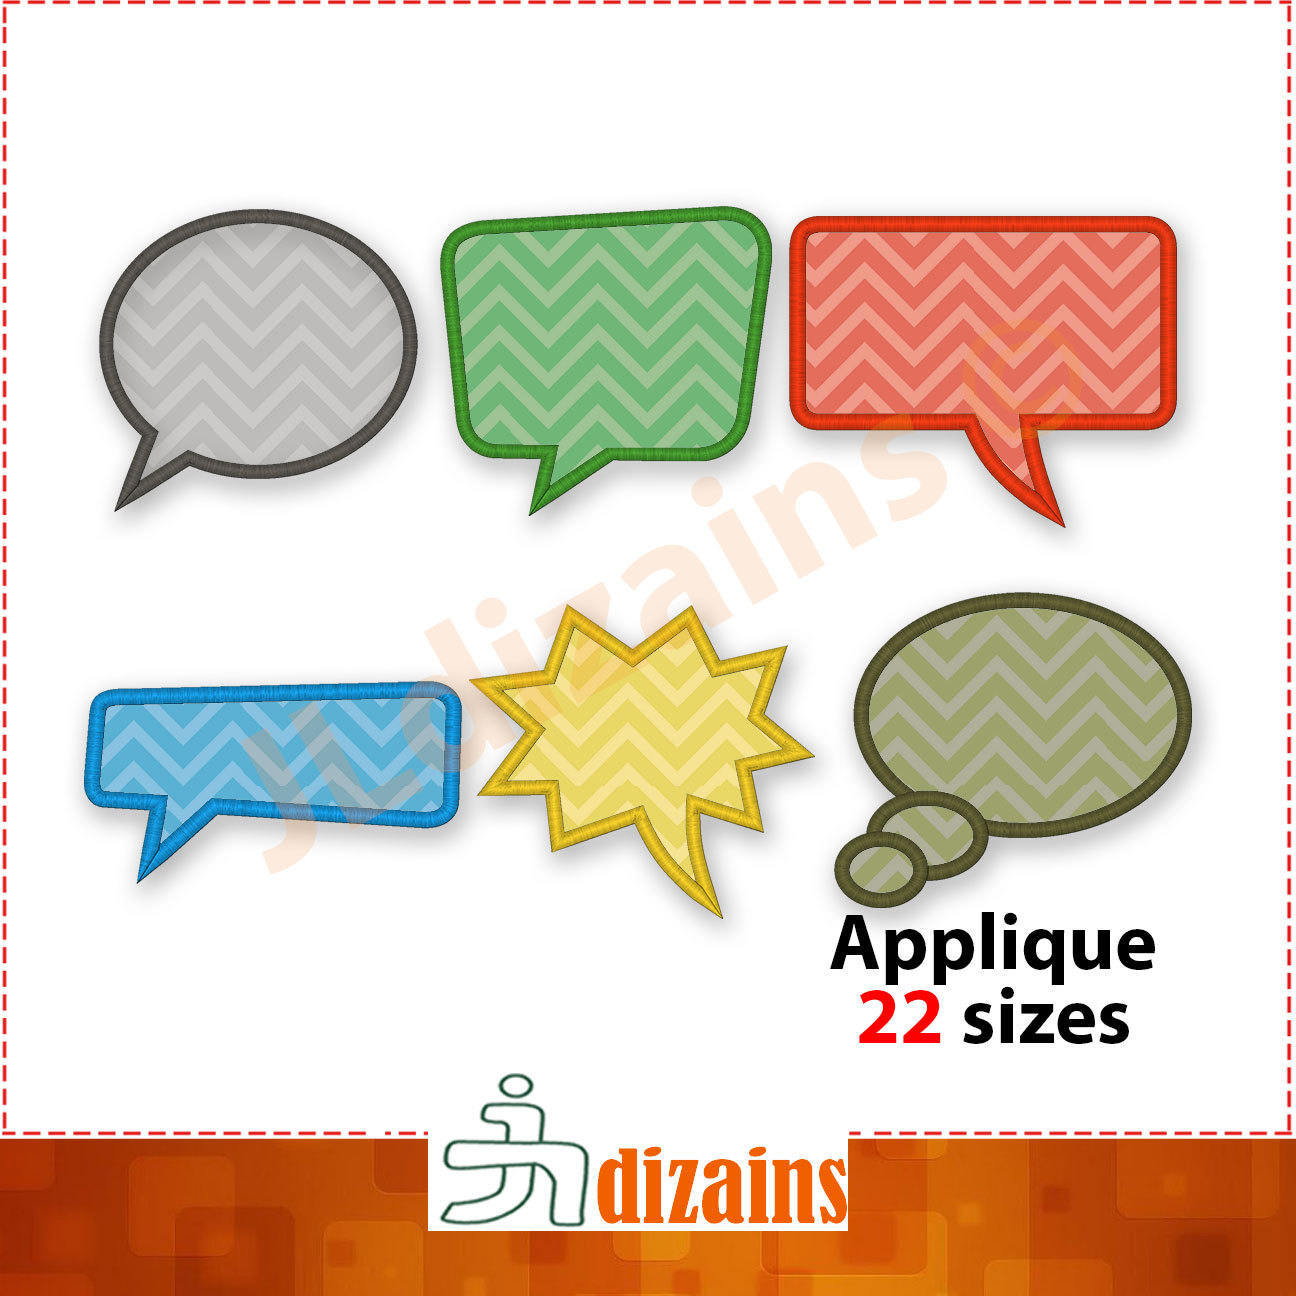 Speech Bubble Stickers Thought Bubble Stickers Speech Bubble Stickers  Planner Stickers Journal Stickers 